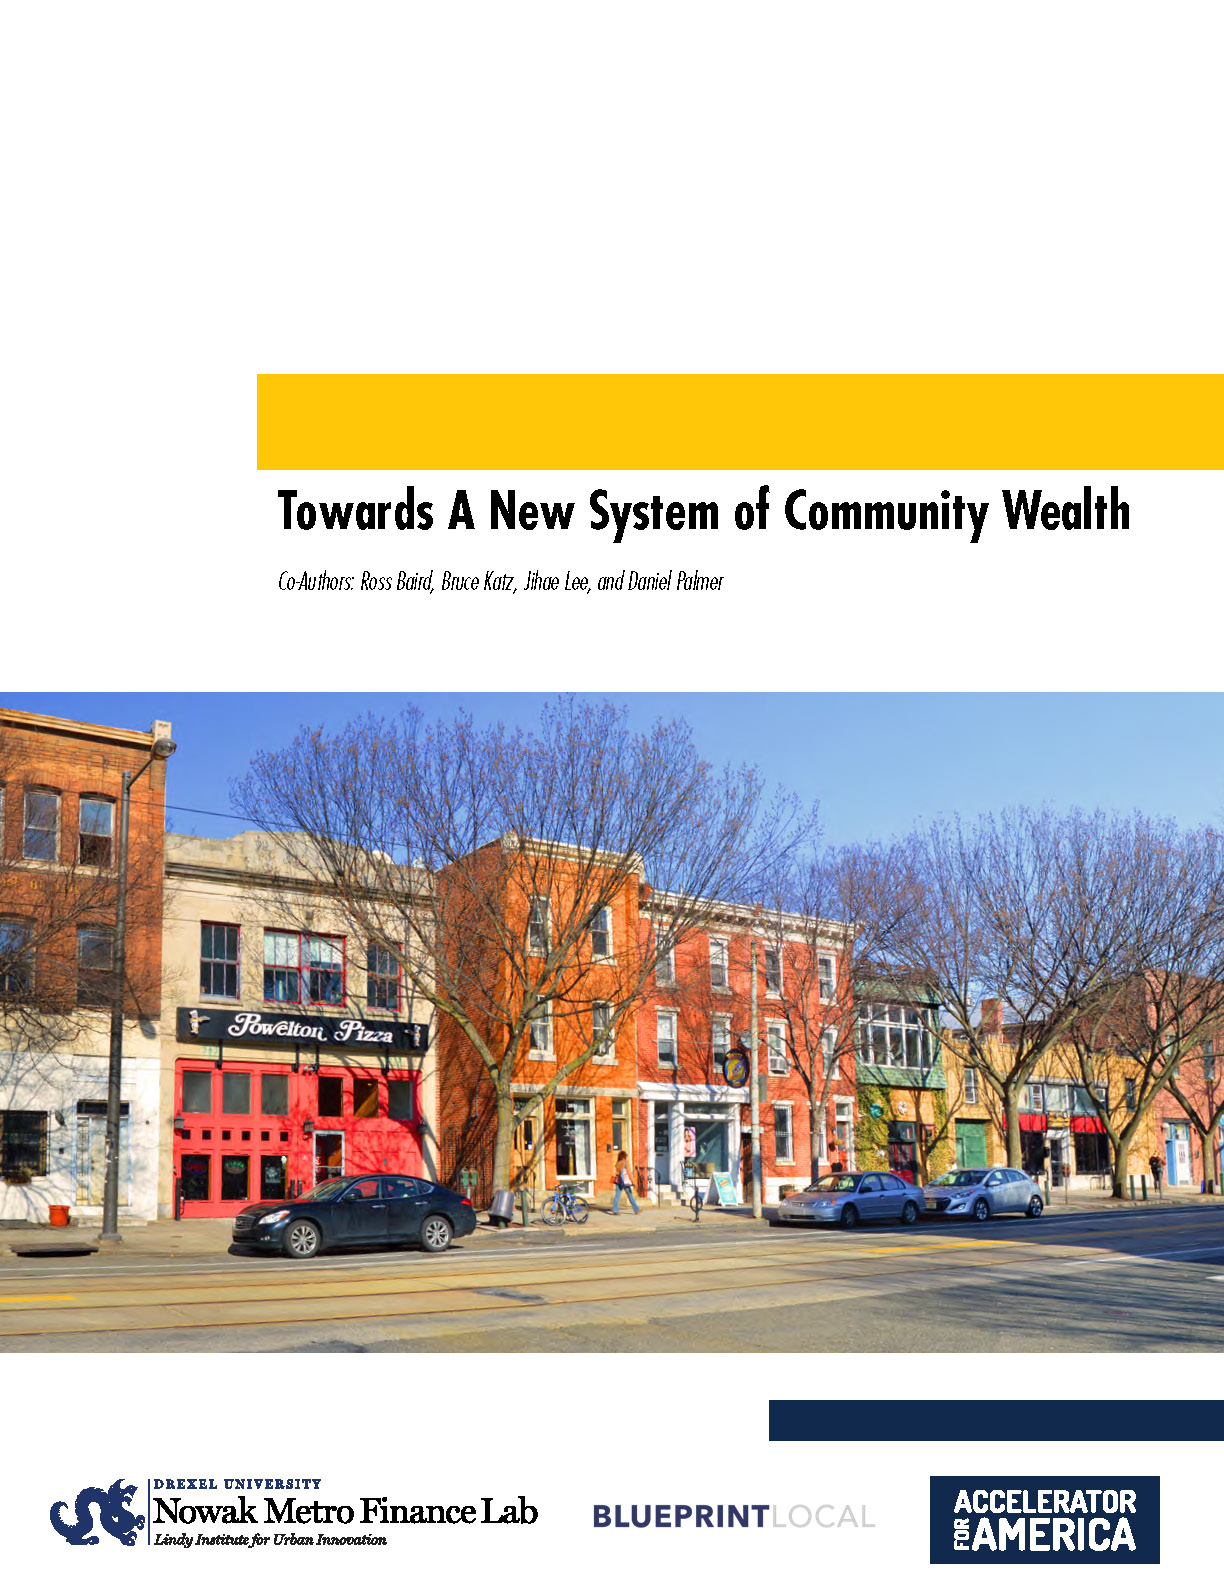 Cover image of the Nowak Lab's publication "Towards a New System of Community Wealth"